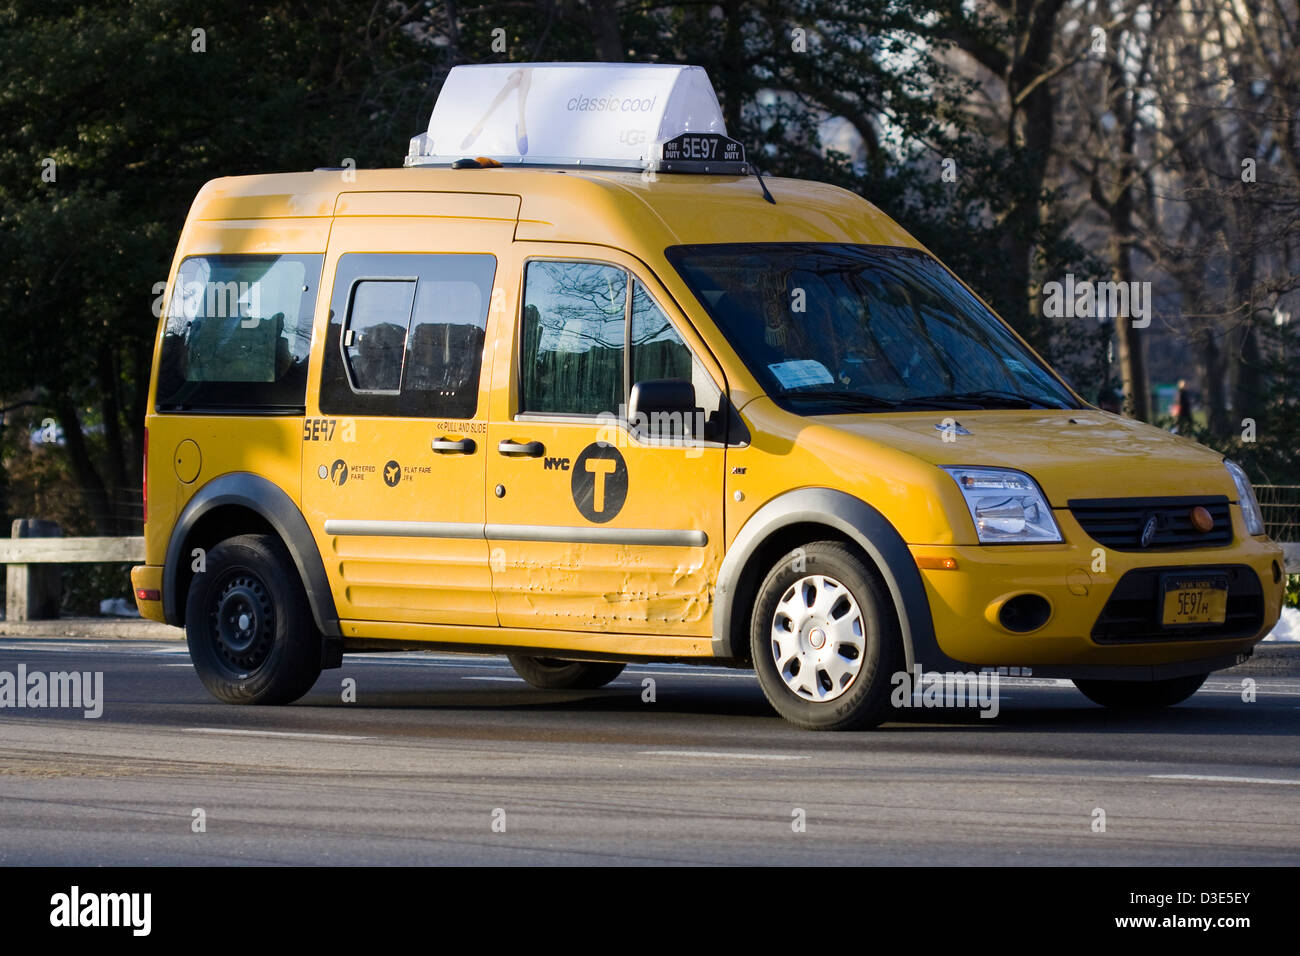 Ford Transit Connext Compact Panel Van developed by Ford Europe used as a NYC Taxi Cab in Central Park in New York City Stock Photo